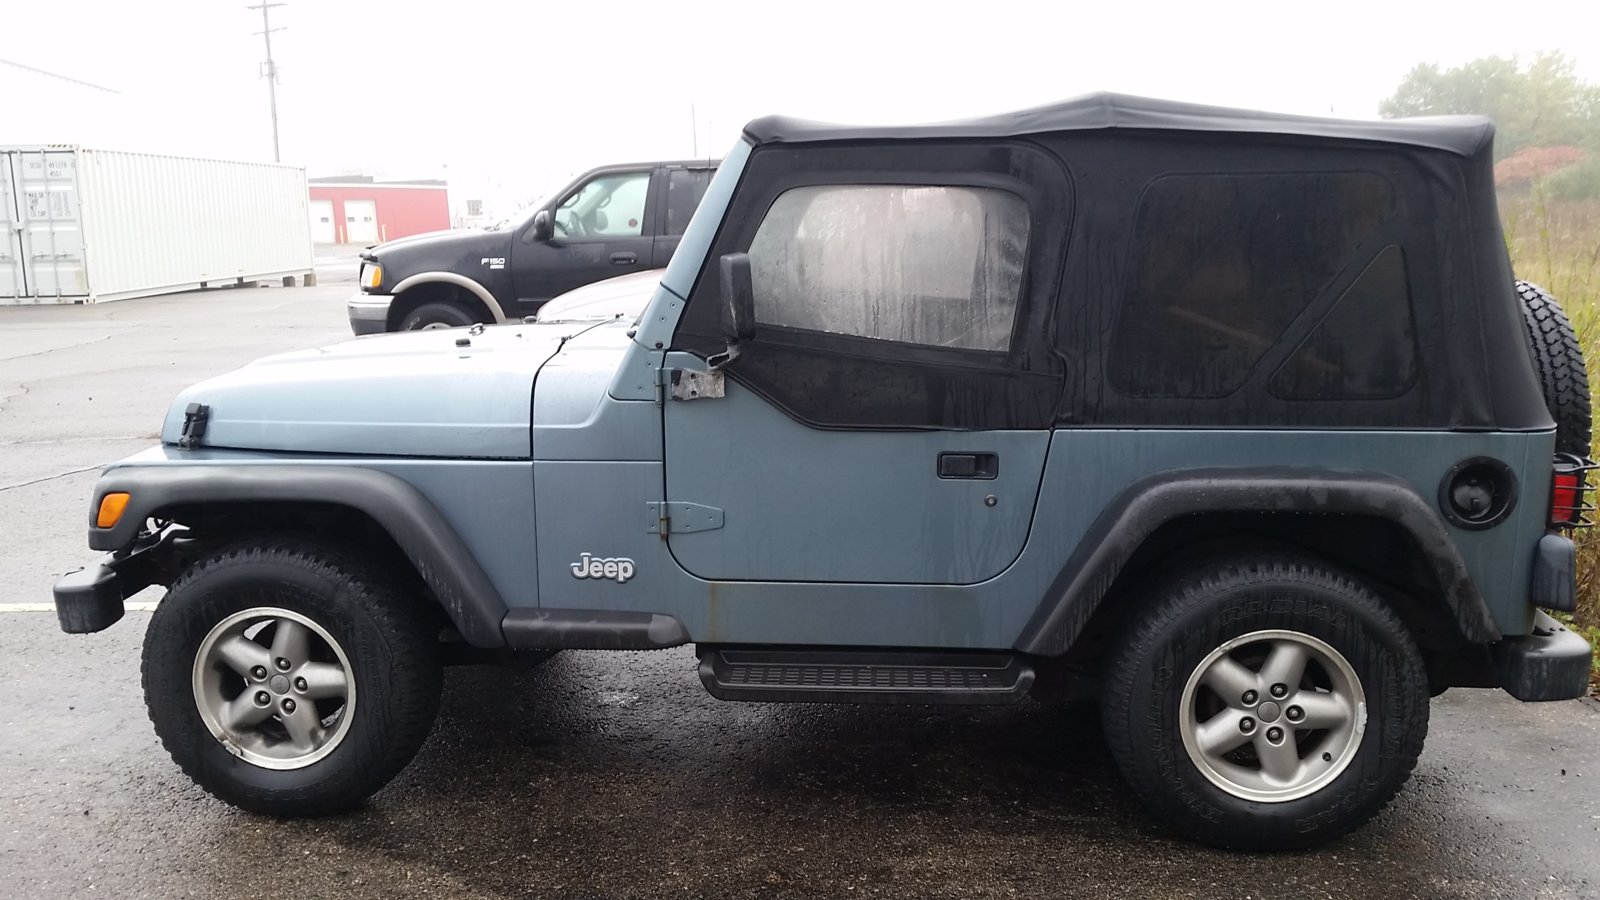 98 TJ with a blown engine; best options? | Jeep Wrangler TJ Forum